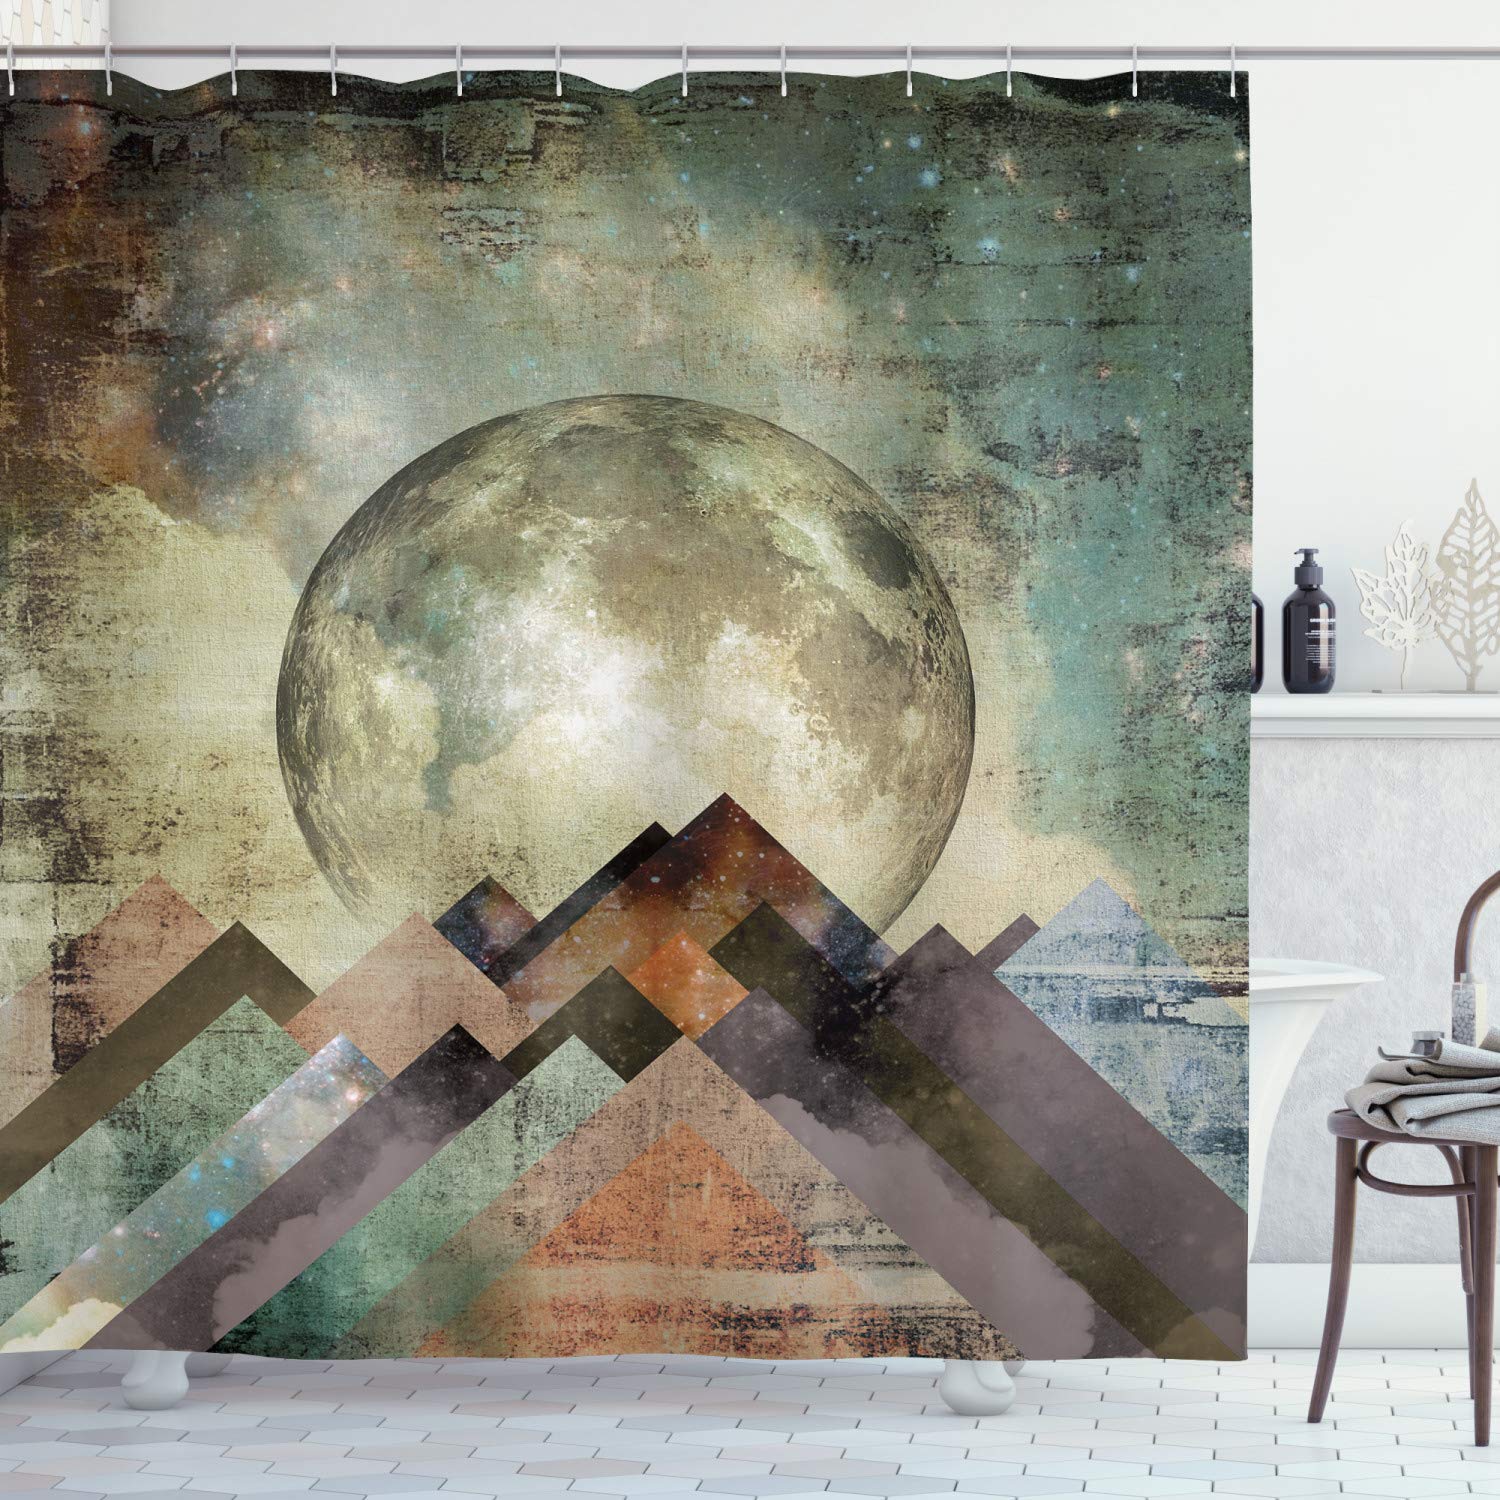 Ambesonne Vintage Rustic Geometric Decorations Collection, Grunge Pastel Moonshine Moon Print Retro Paintings, Polyester Fabric Bathroom Shower Curtain Set with Hooks, Teal Beige Brown